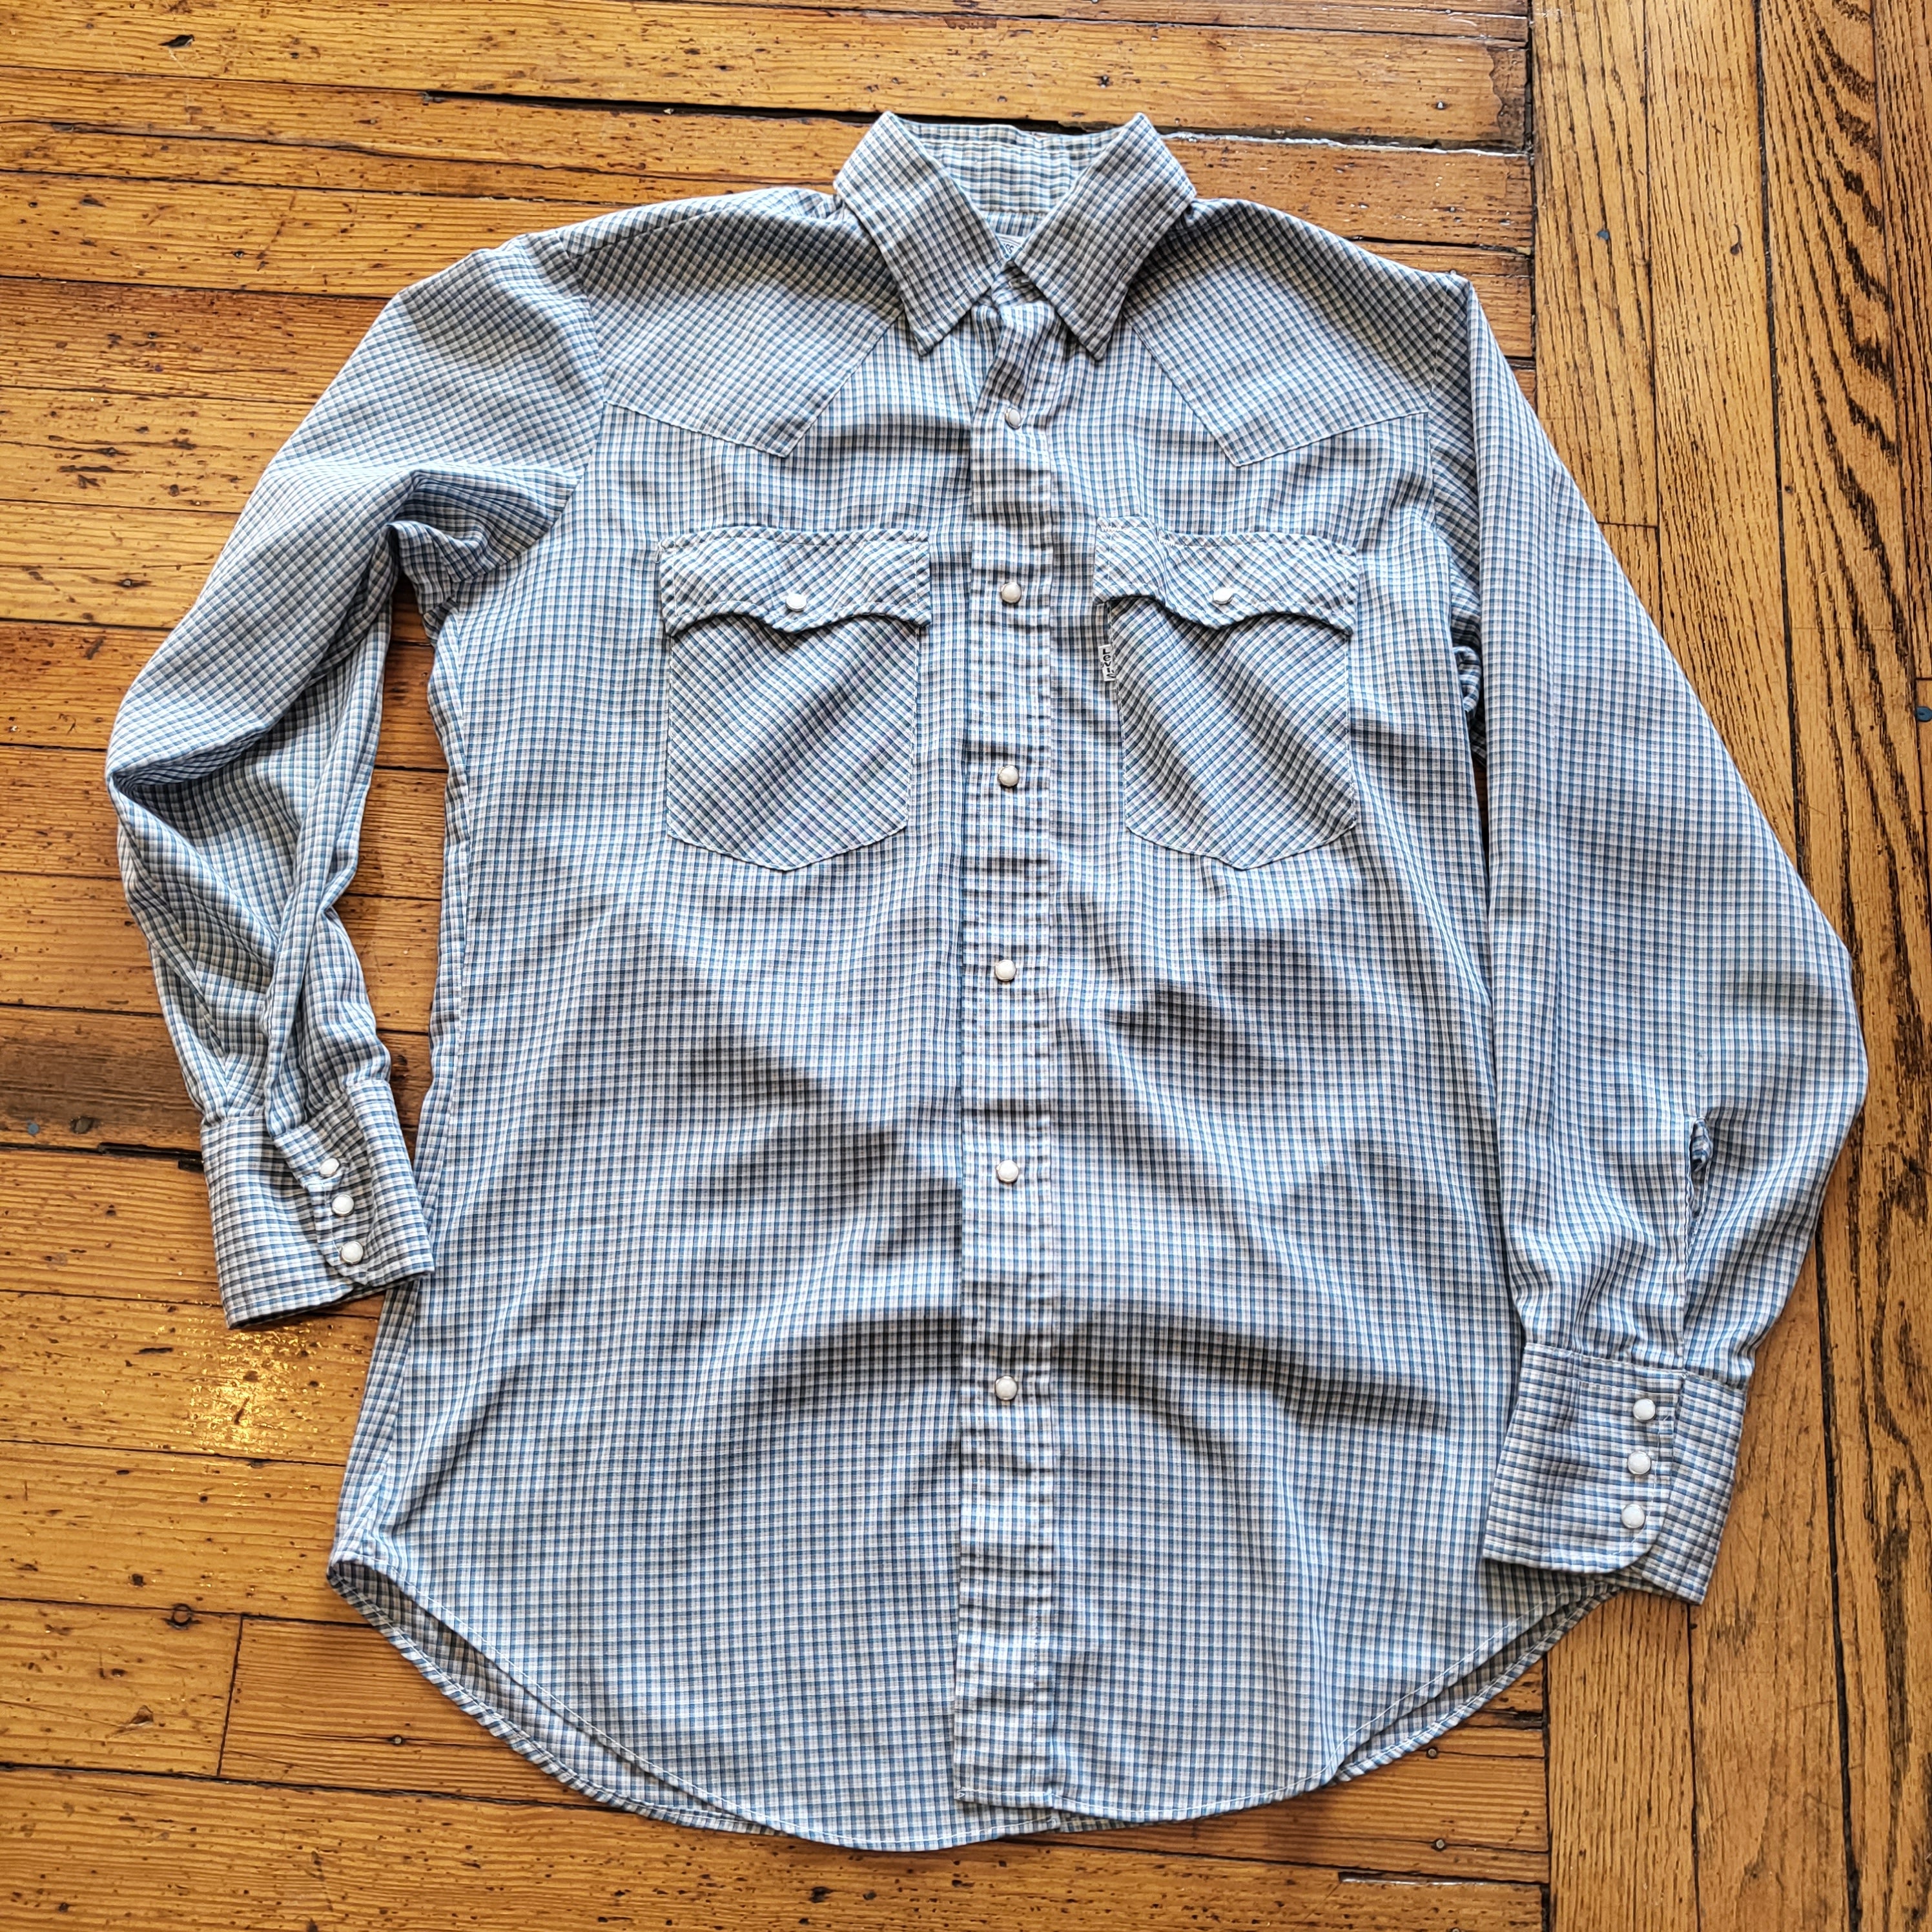 Levi Strauss & Co Vintage 1970s Pearl Snap Button Down Shirt Size 